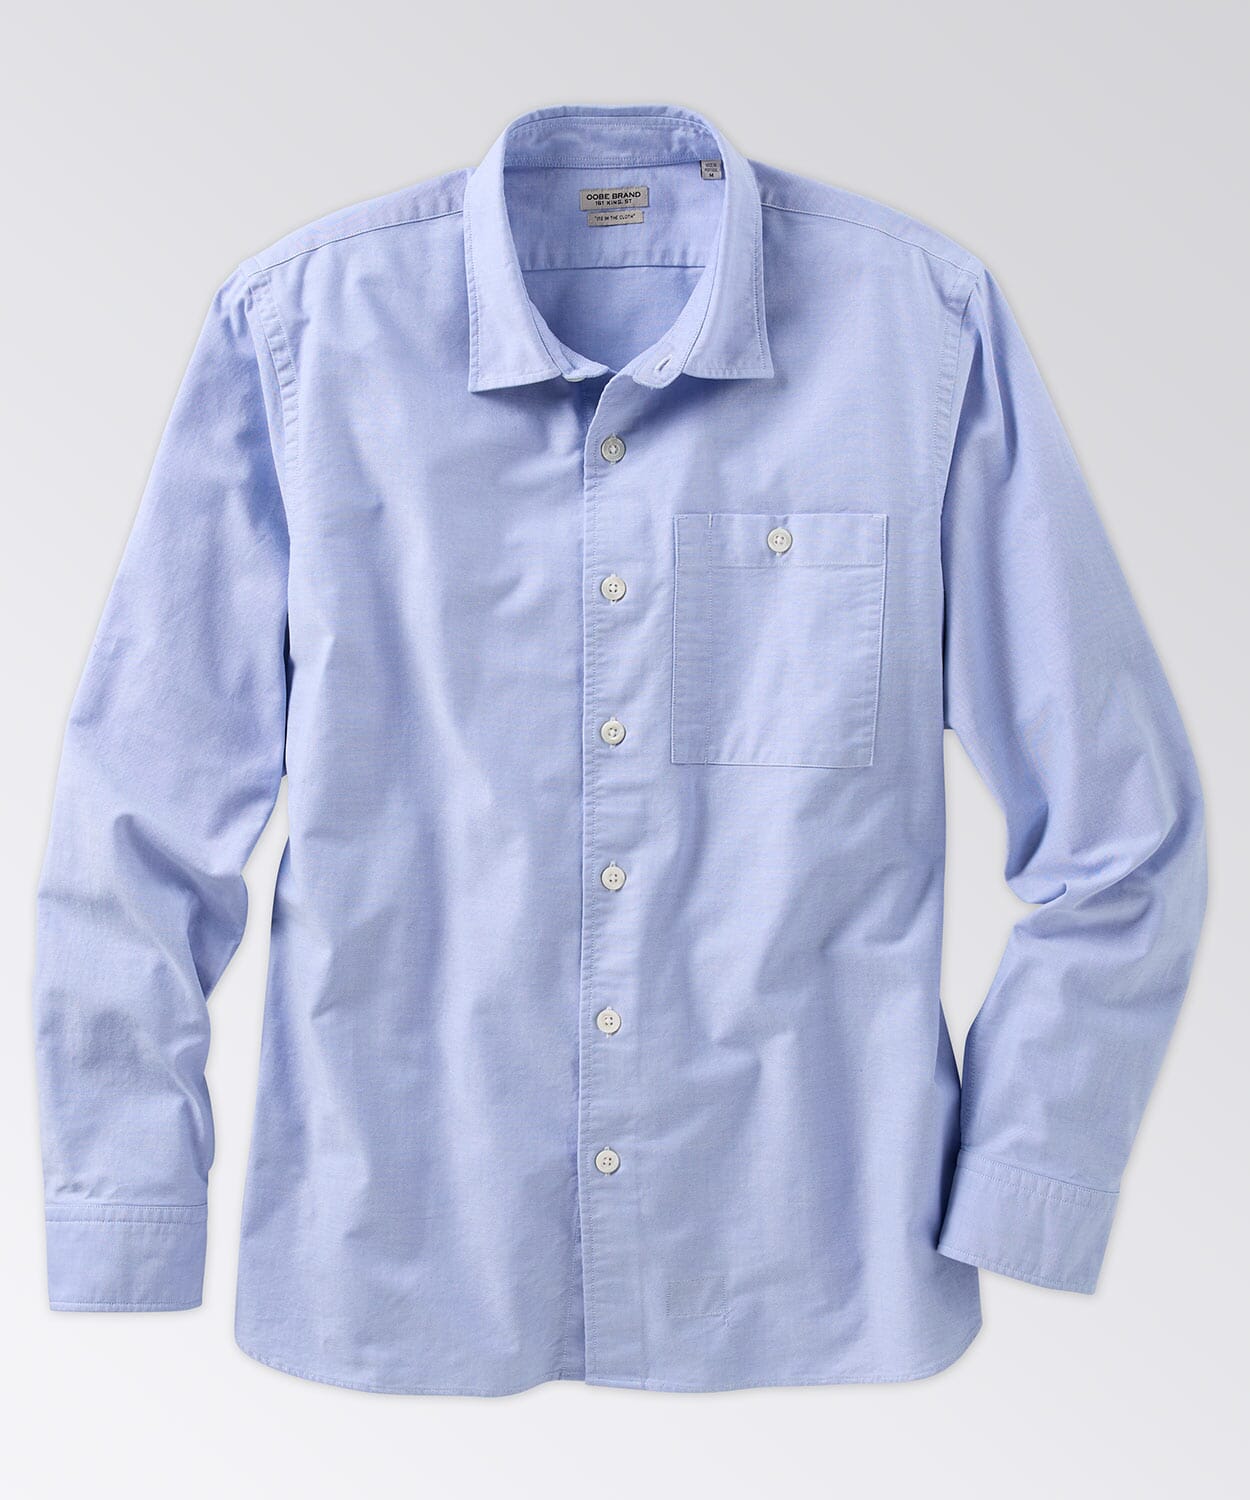 Aalto Oxford Shirt Button Downs OOBE BRAND Blue Oxford S 